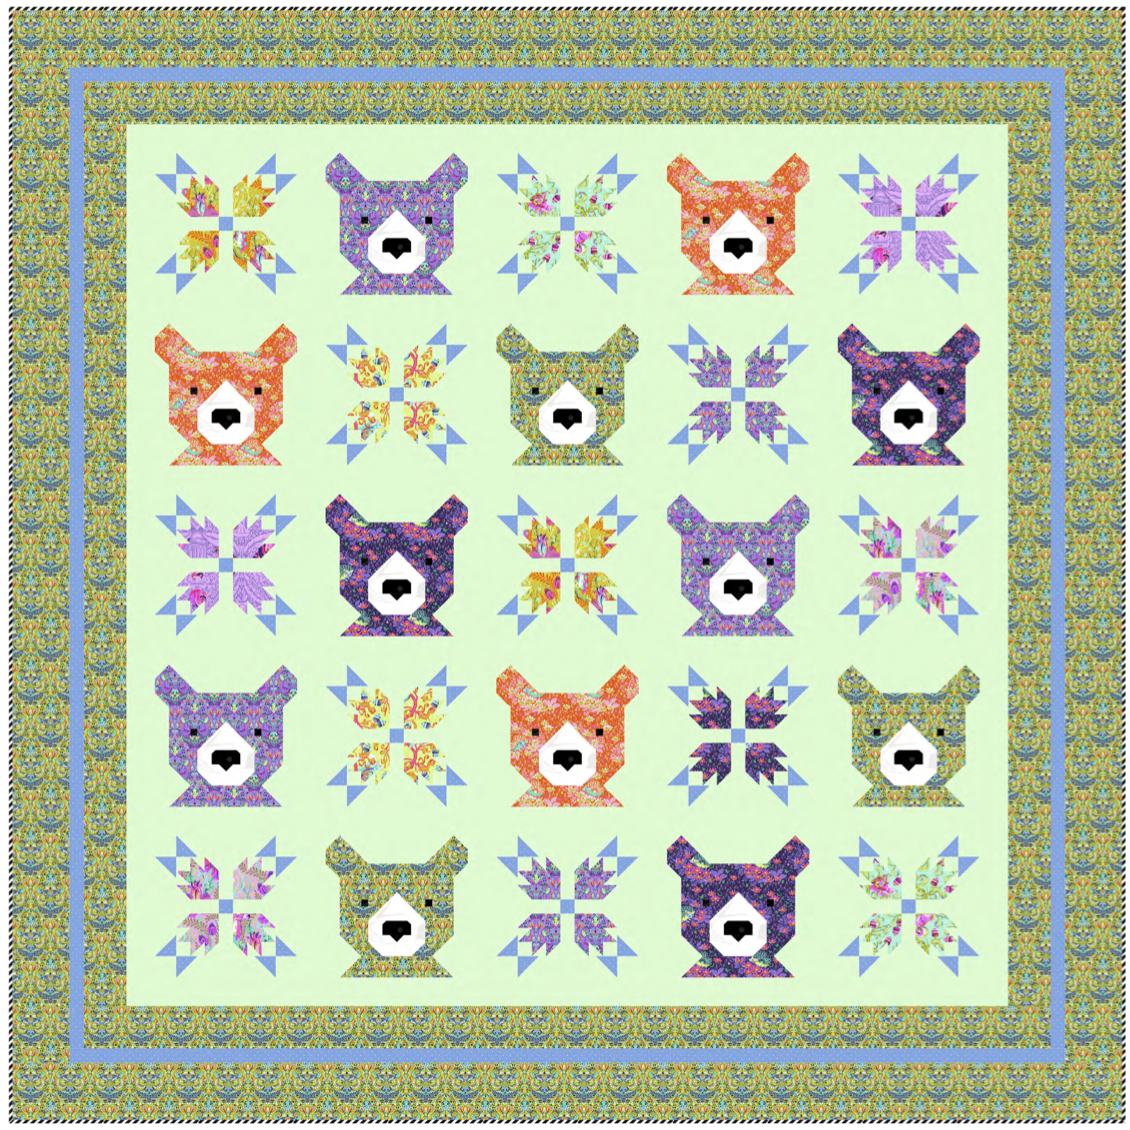 Bear and Bear Paws Paper Quilt Pattern